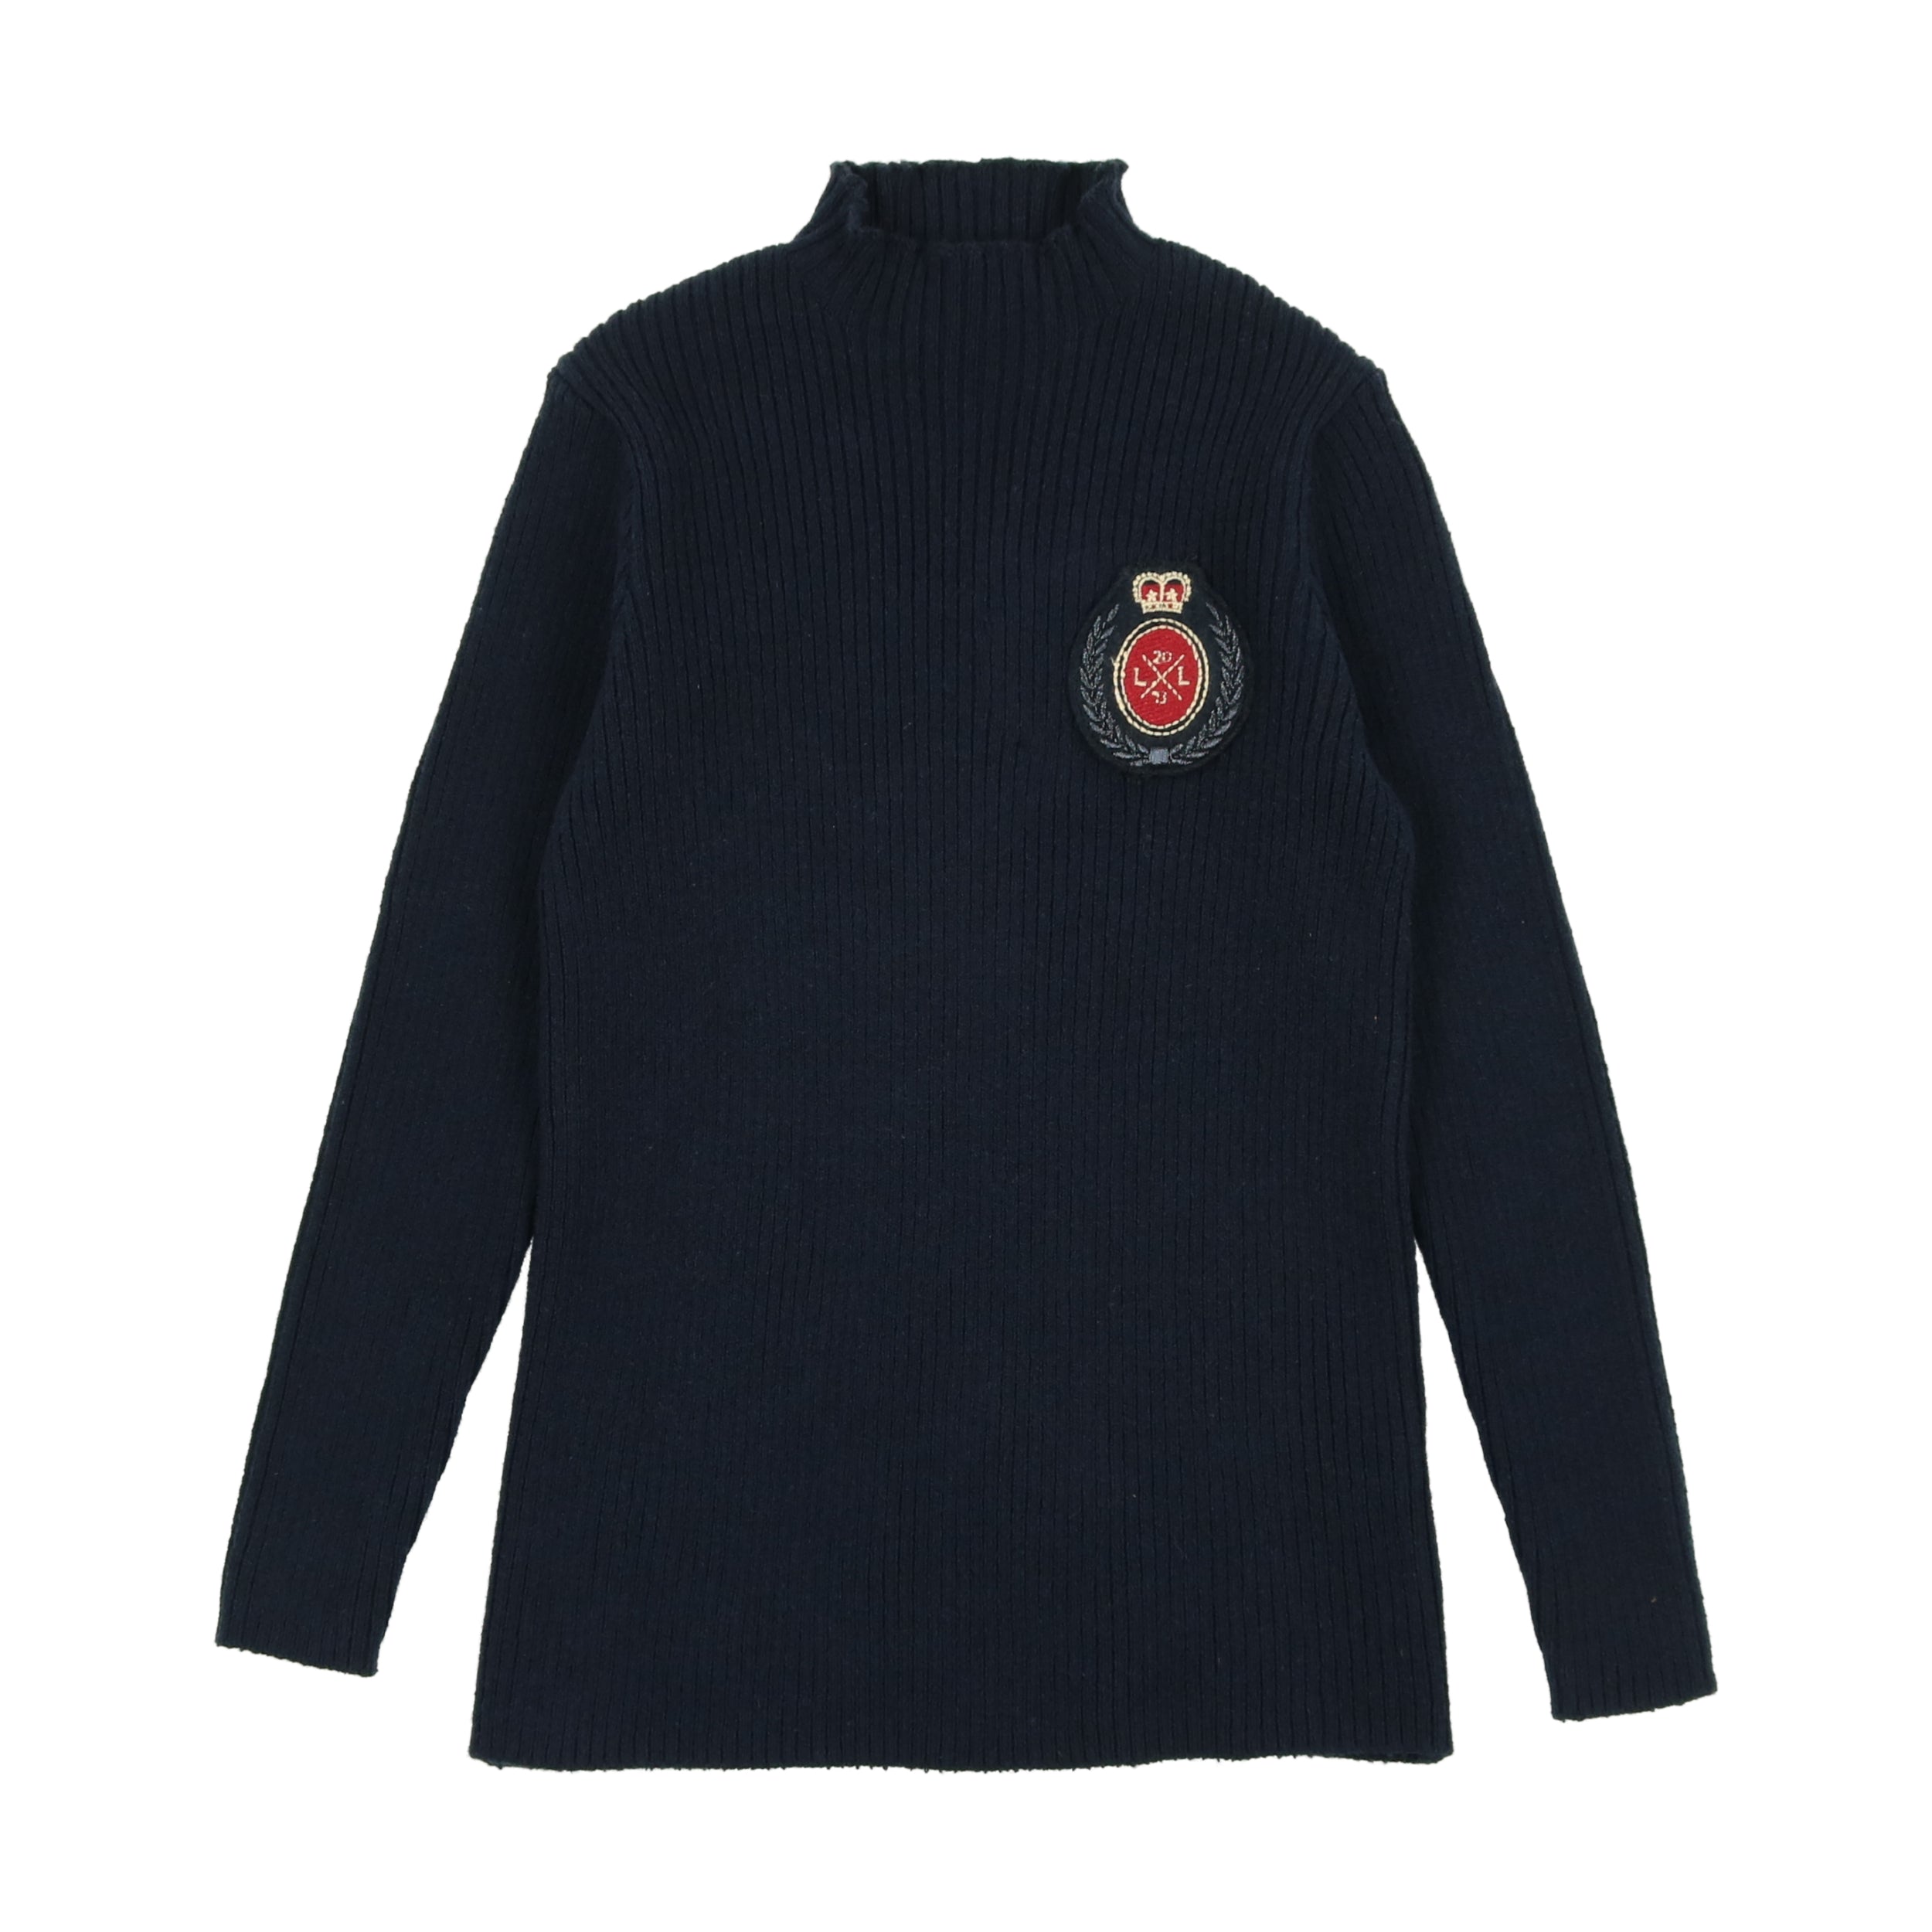 Crest Knit Funnel Neck Sweater